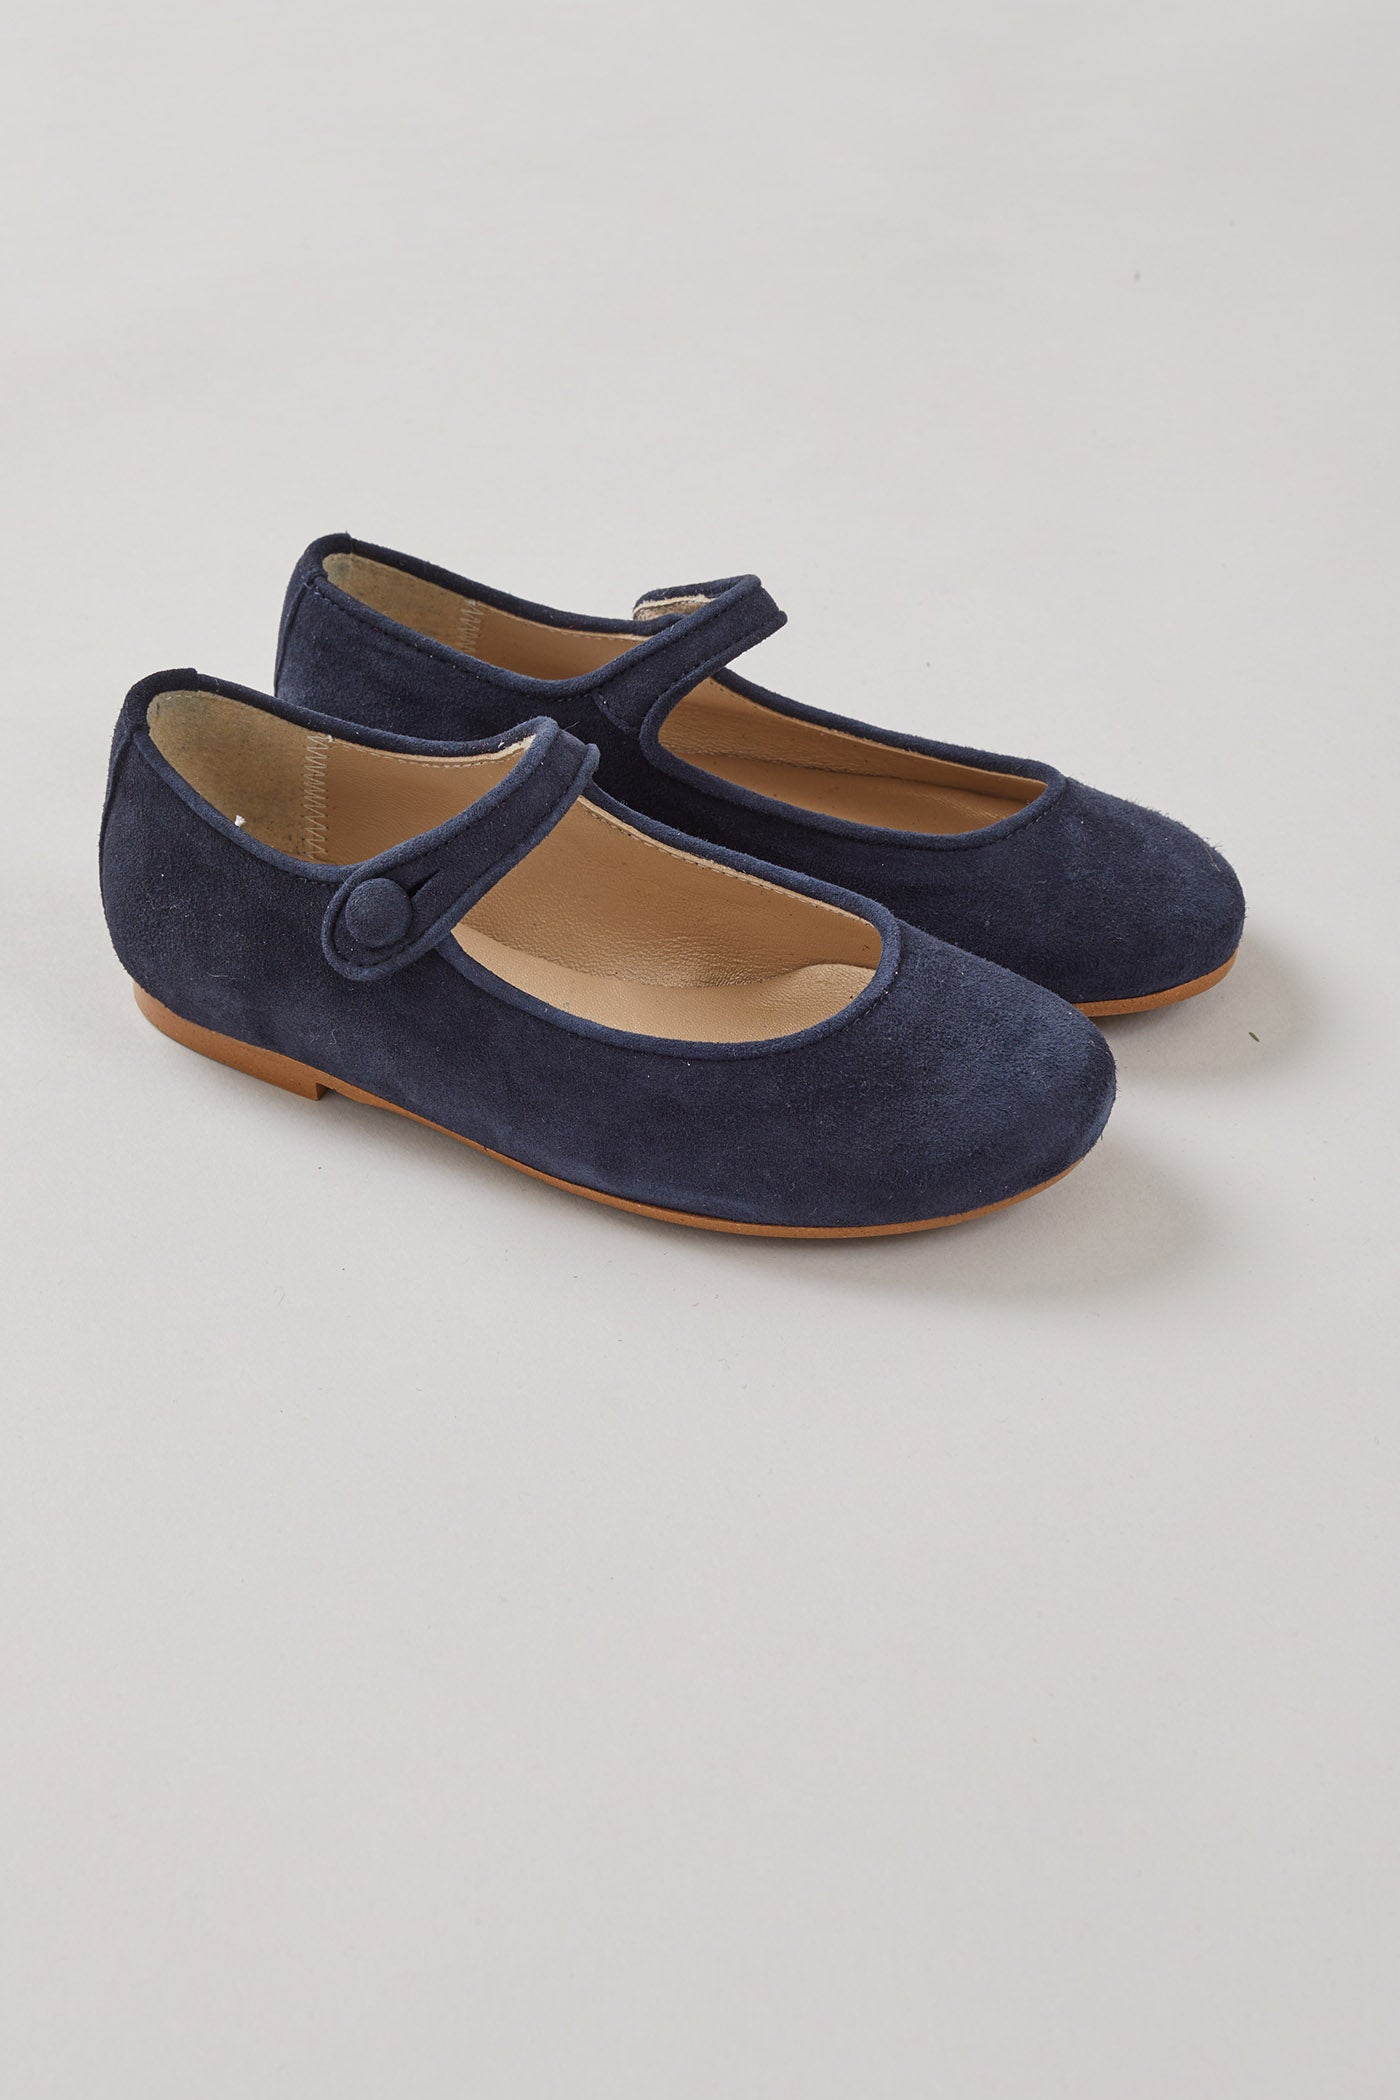 Suede Mary Jane Navy